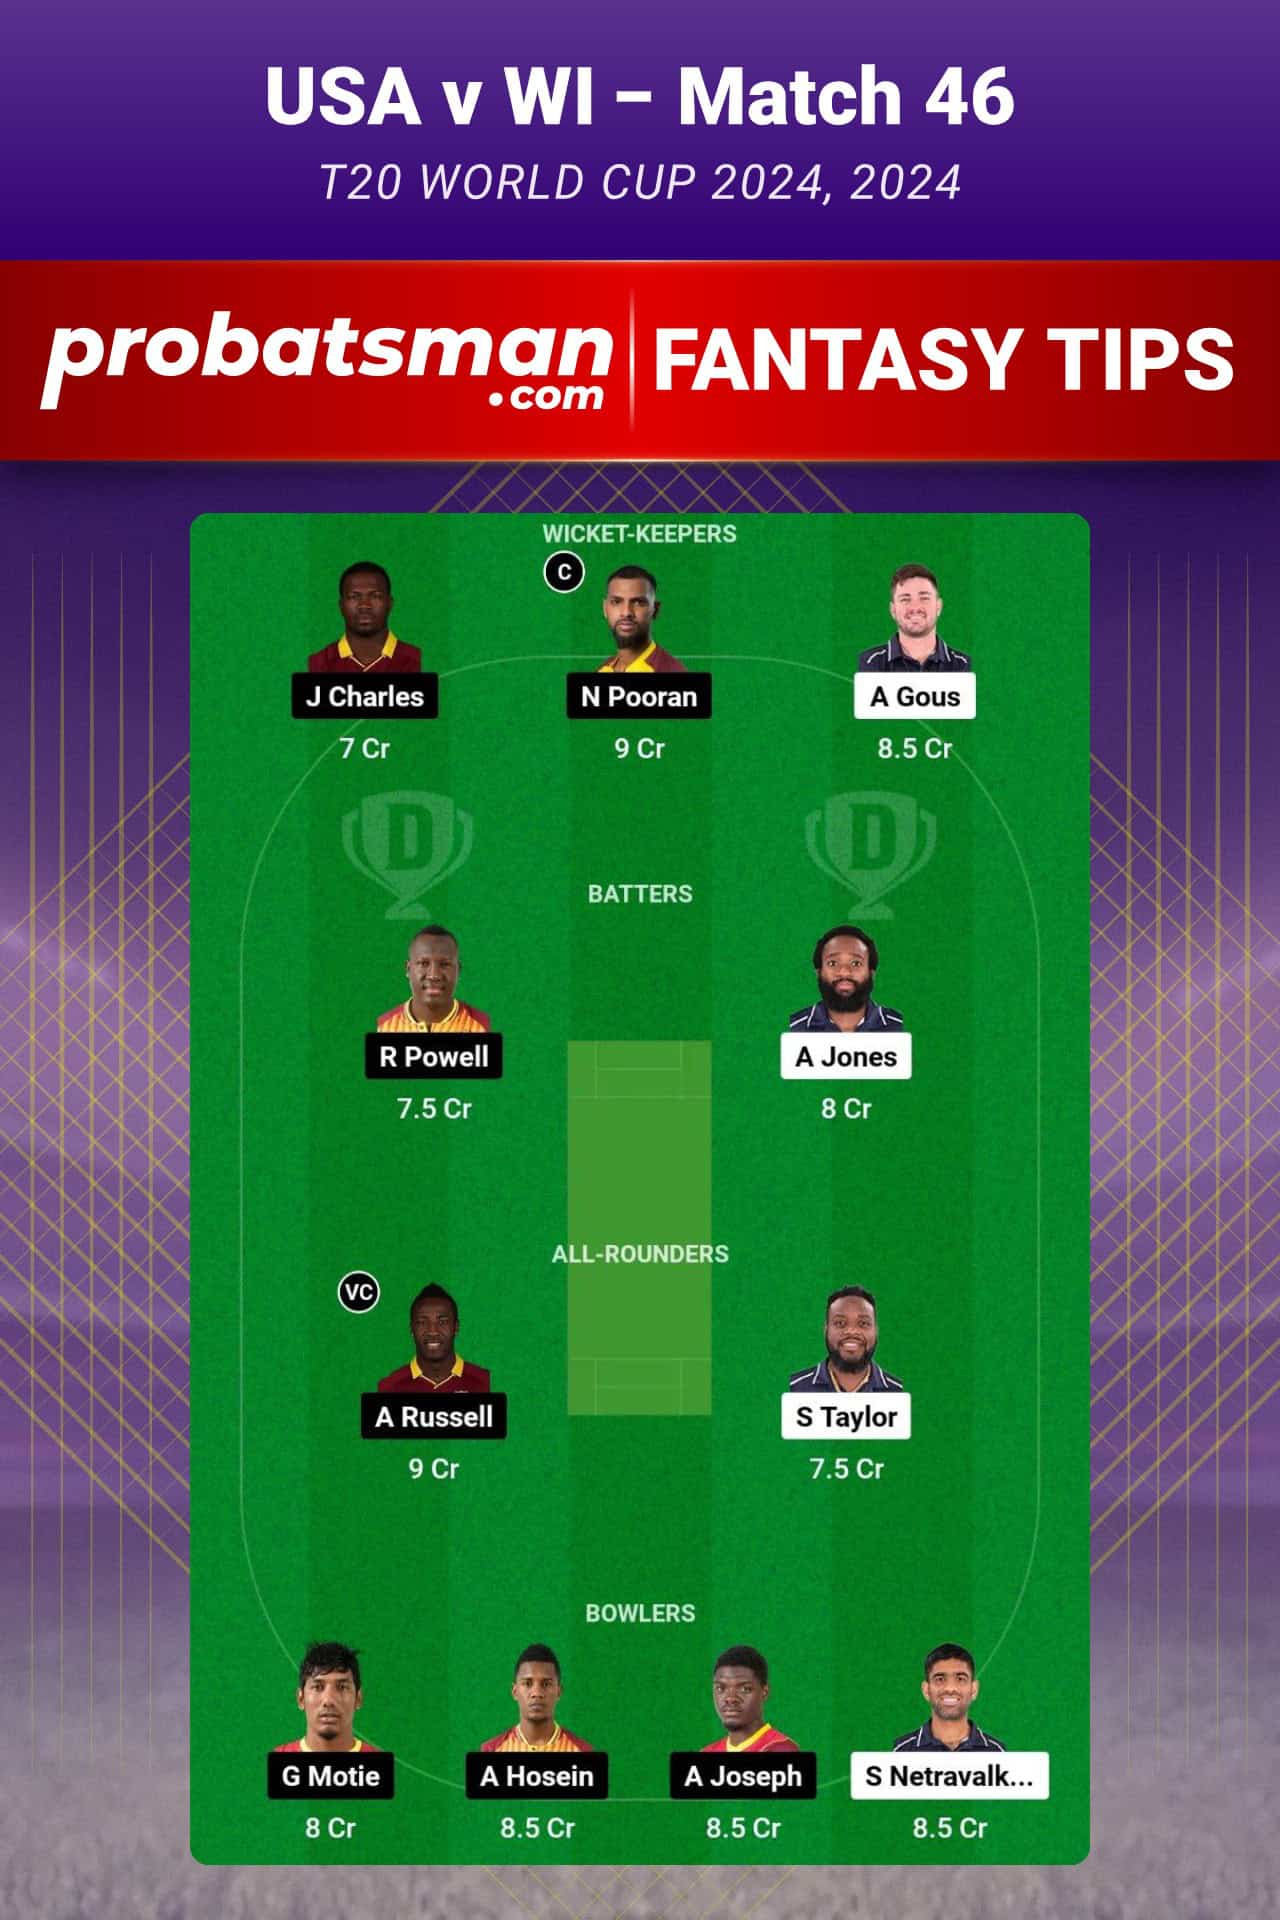 USA vs WI Dream11 Prediction For Match 46 of T20 World Cup 2024